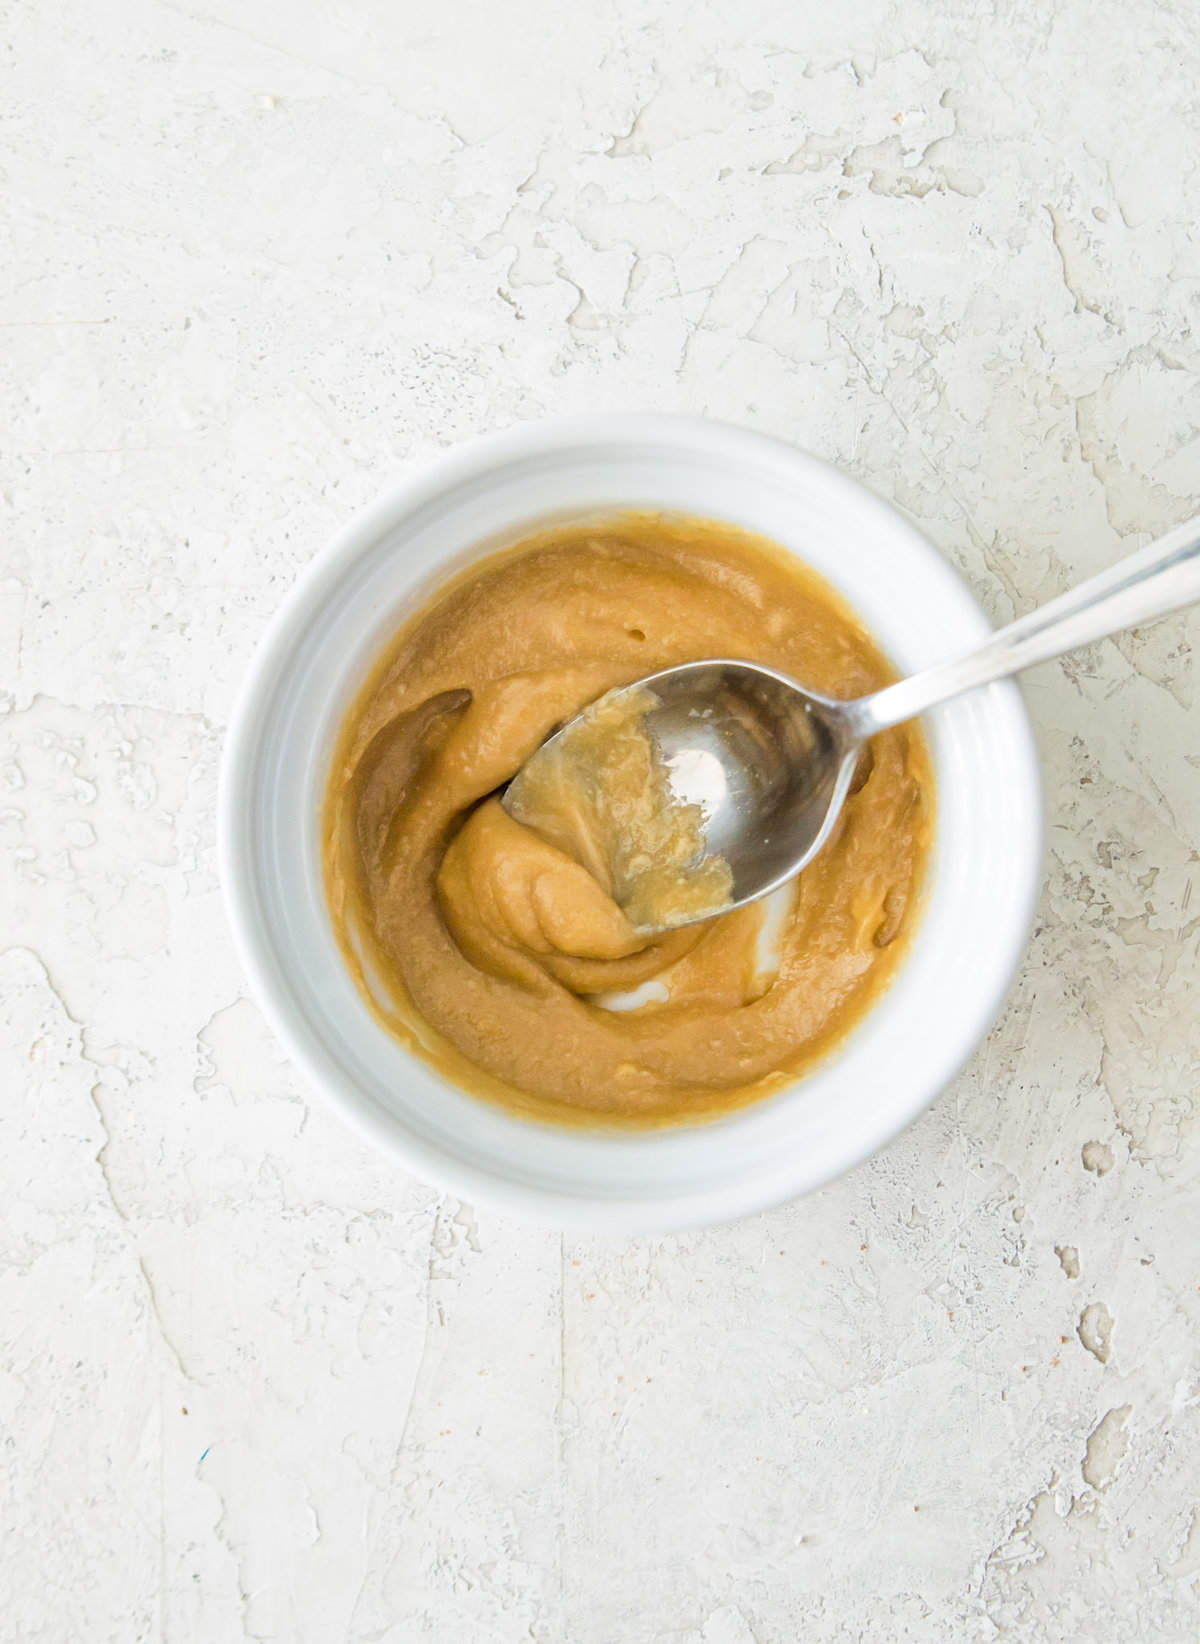 A caramel sauce in a bowl with a spoon in it.